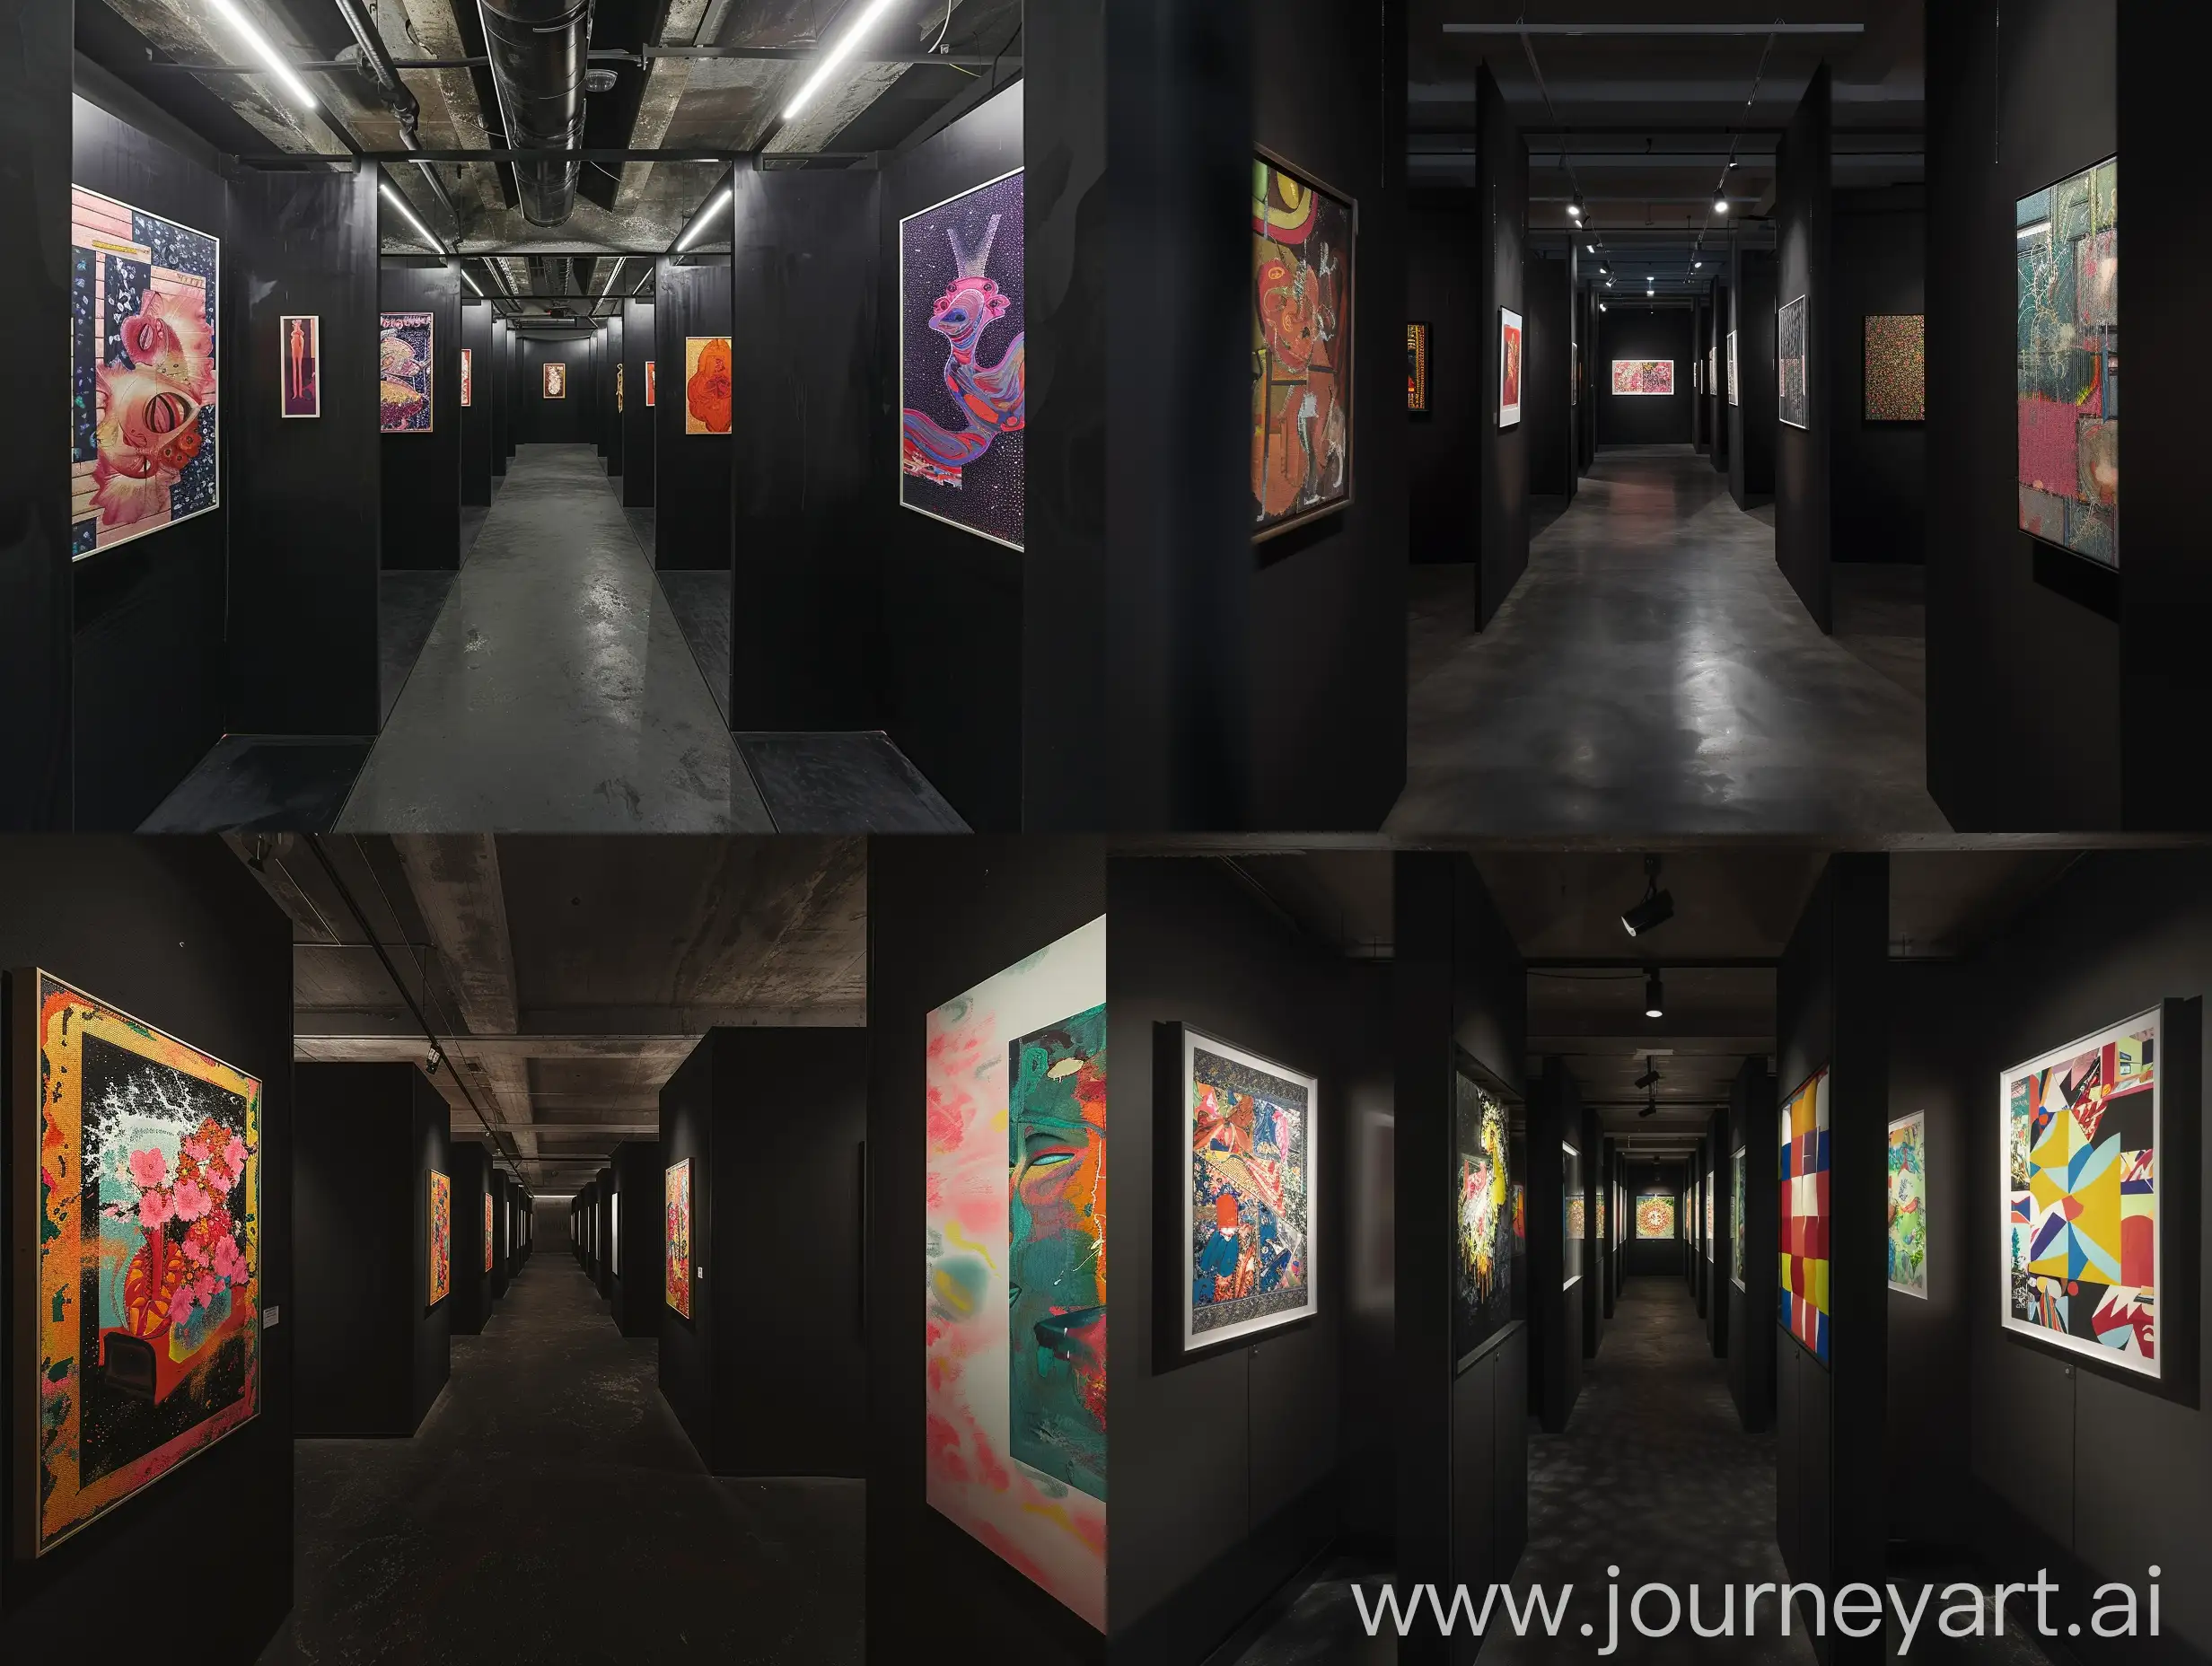 A dark and narrow gallery with artworks in one personal booth each. The booths are spacious and minimalist, with black walls and floors. Partitions between each artworks are 1 meter long. The artworks are colorful and diverse. The gallery has no windows and relies on indirect artificial lighting. The artworks are only visible when the viewer enters the booth. The gallery has a corridor-like shape that creates a sense of mystery and exploration.